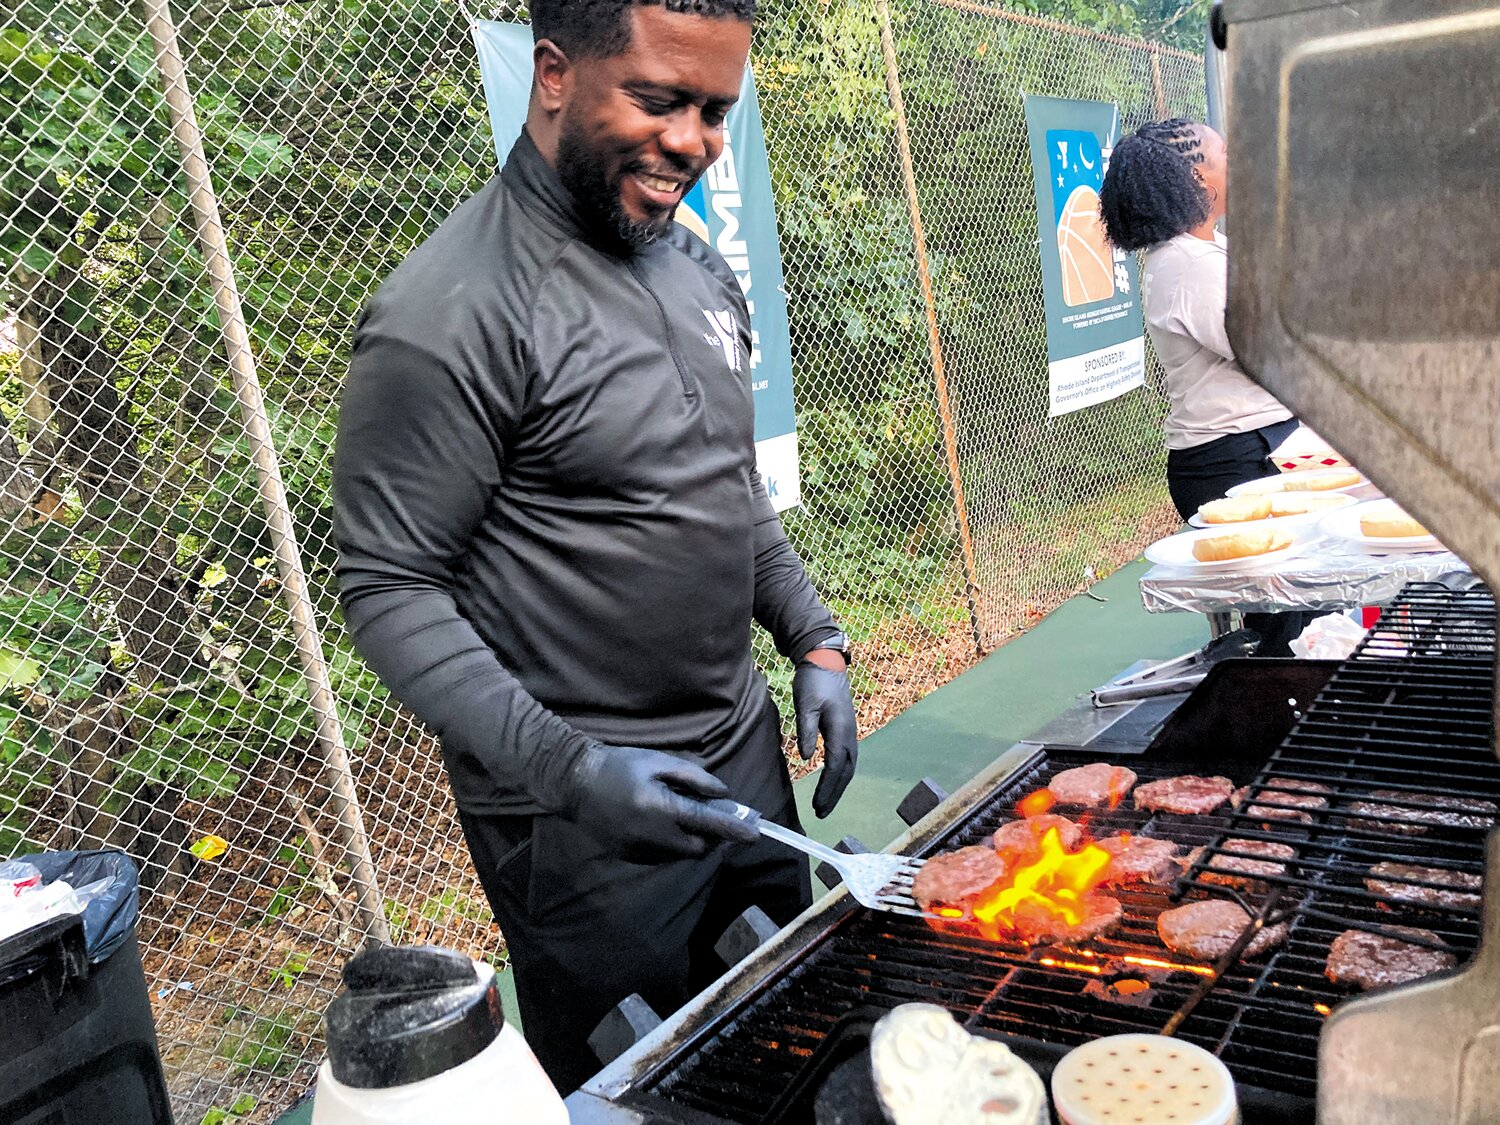 HEATING UP: Greater Providence YMCA COO Kobi Dennis serves up some burgers for fans watching the games.